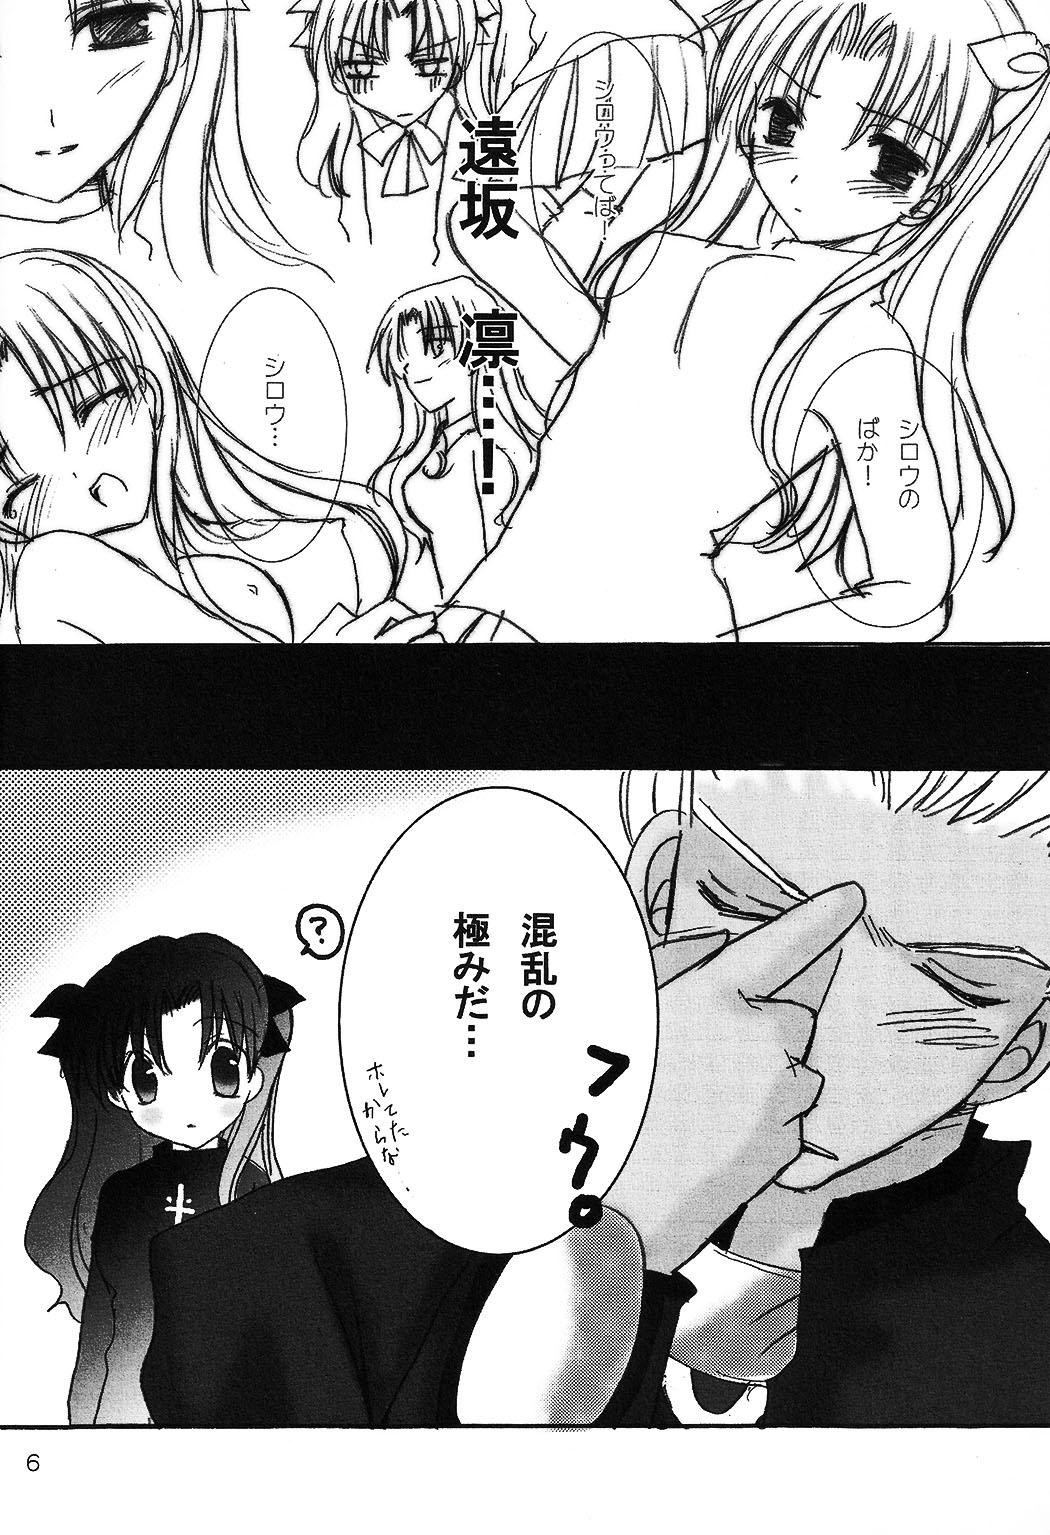 Celebrity Sex DESTINY LOVER - Fate stay night Ikillitts - Page 4